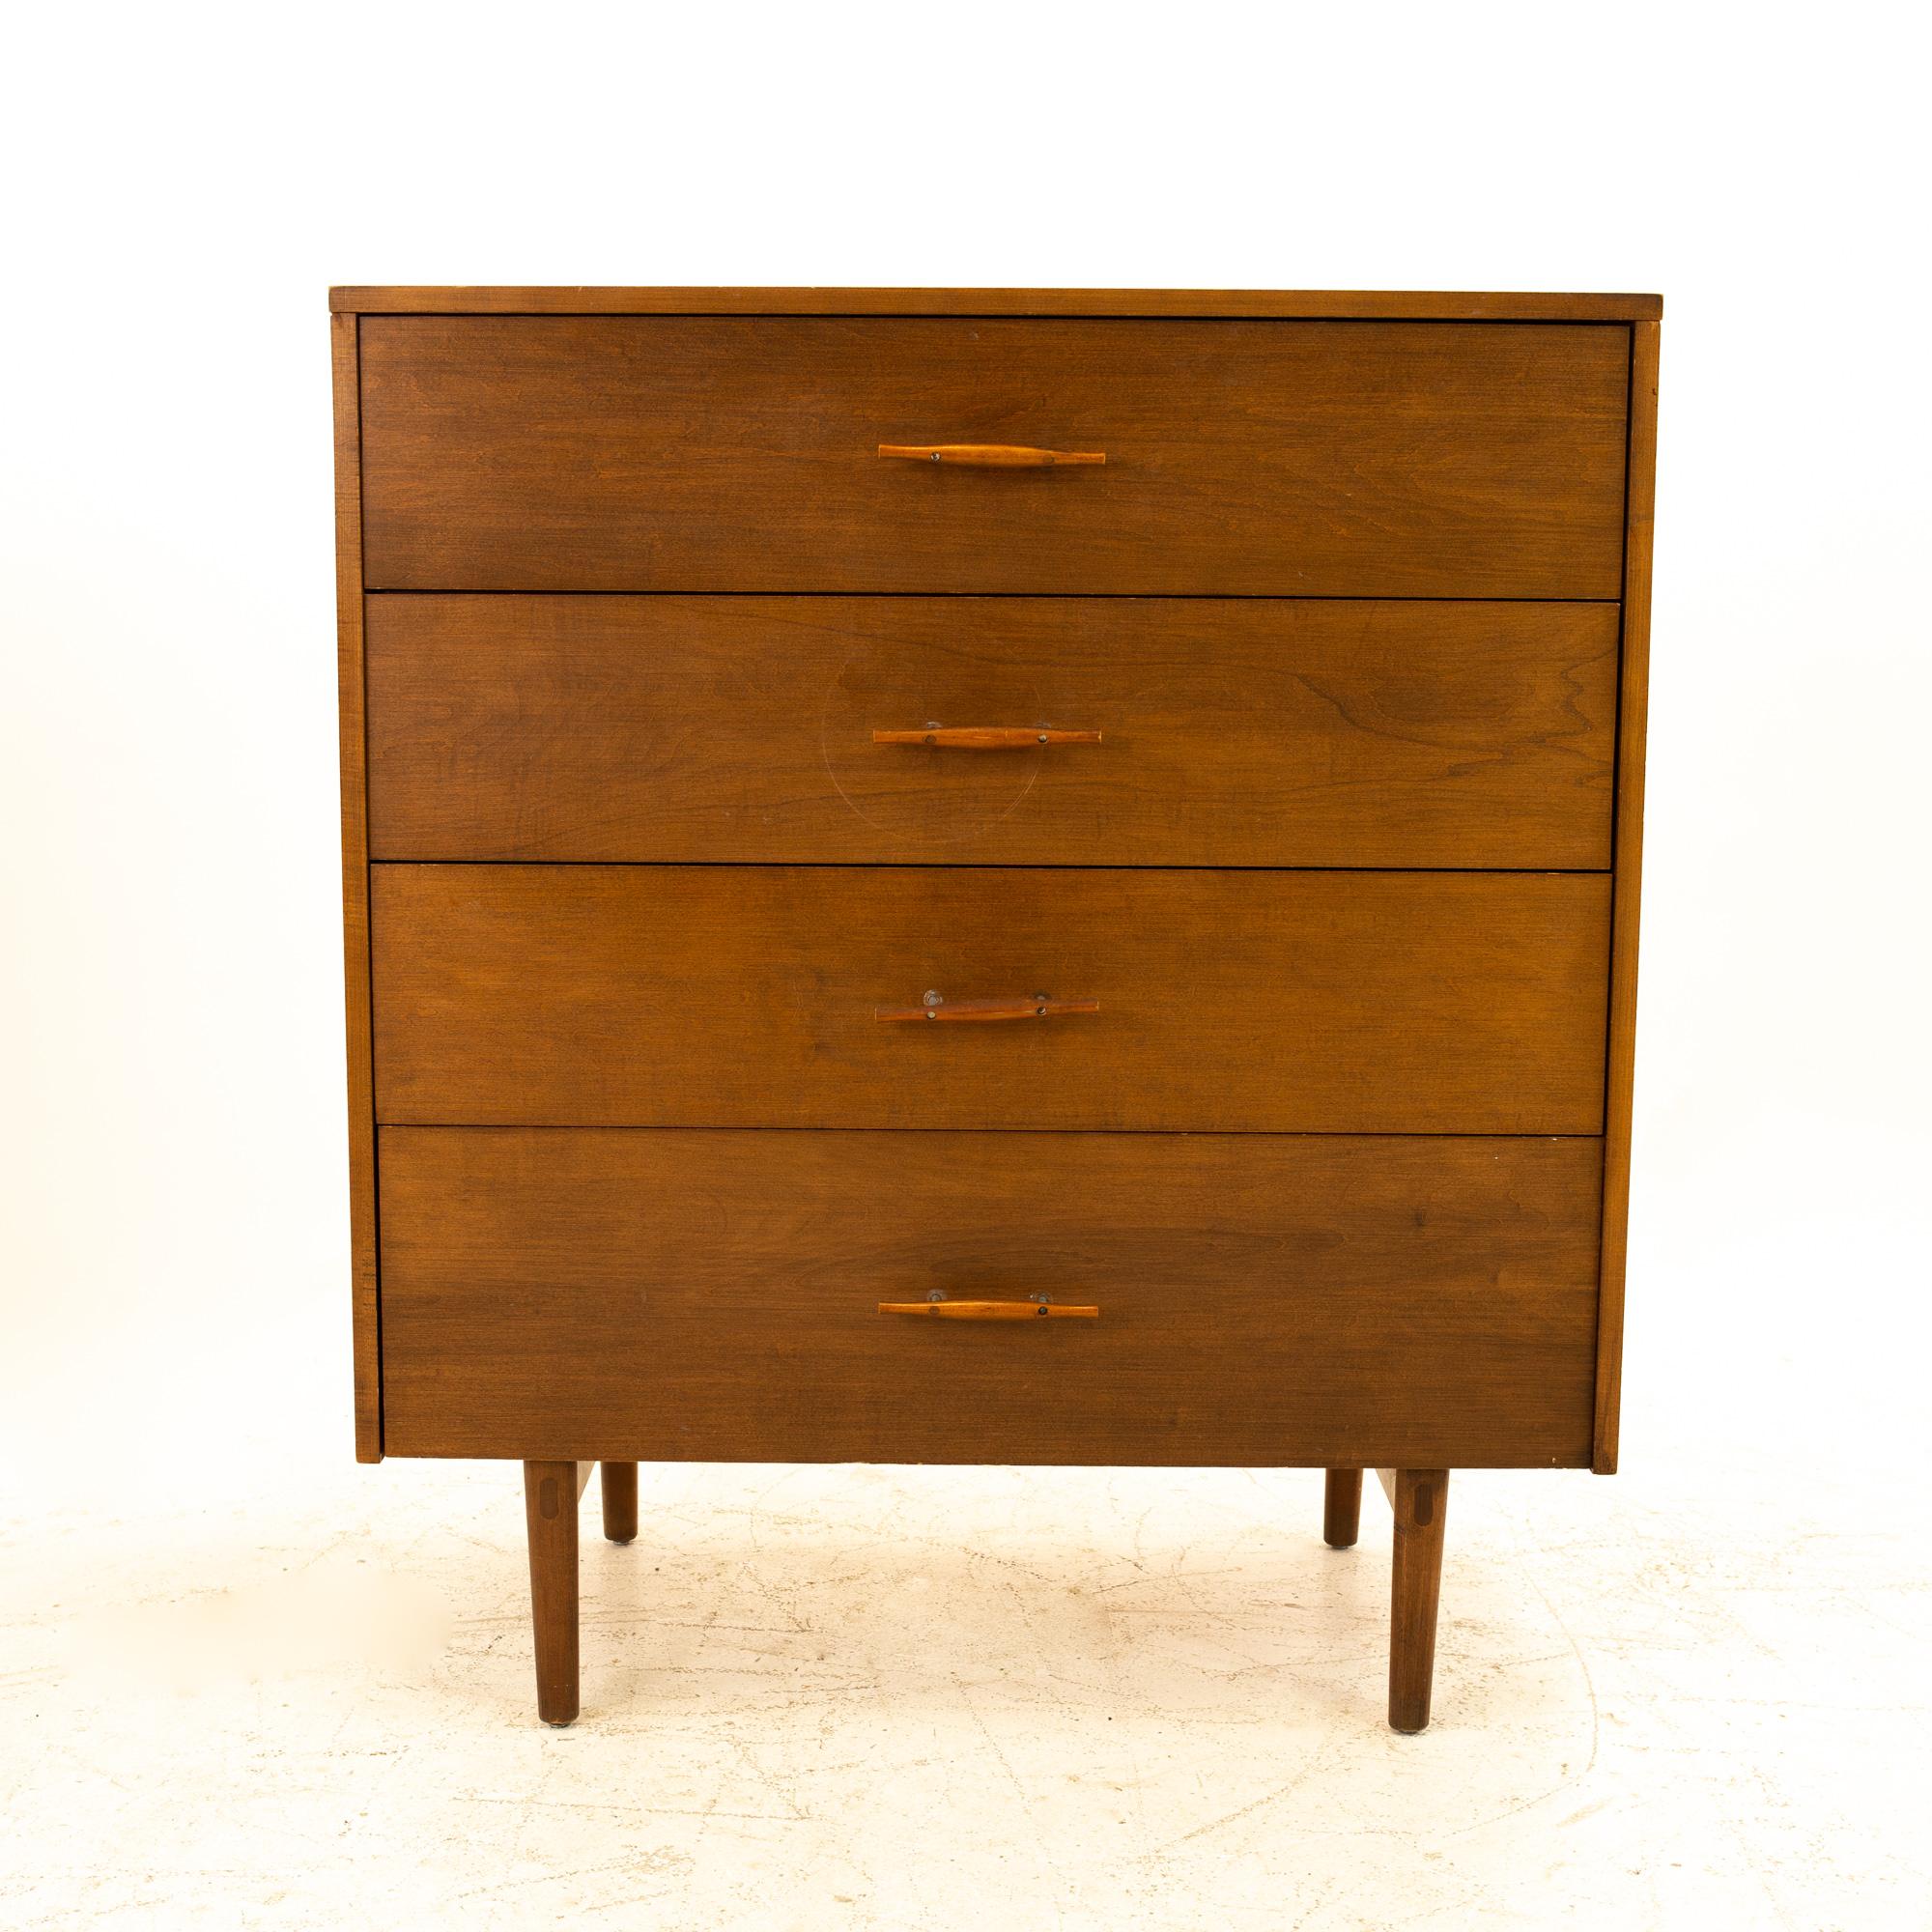 Paul McCobb for Planner Group Mid Century 4 Drawer Dresser

Dresser measures: 36 wide x 18 deep x 41.25 high

All pieces of furniture can be had in what we call Restored Vintage Condition. That means the piece is restored upon purchase so it’s free